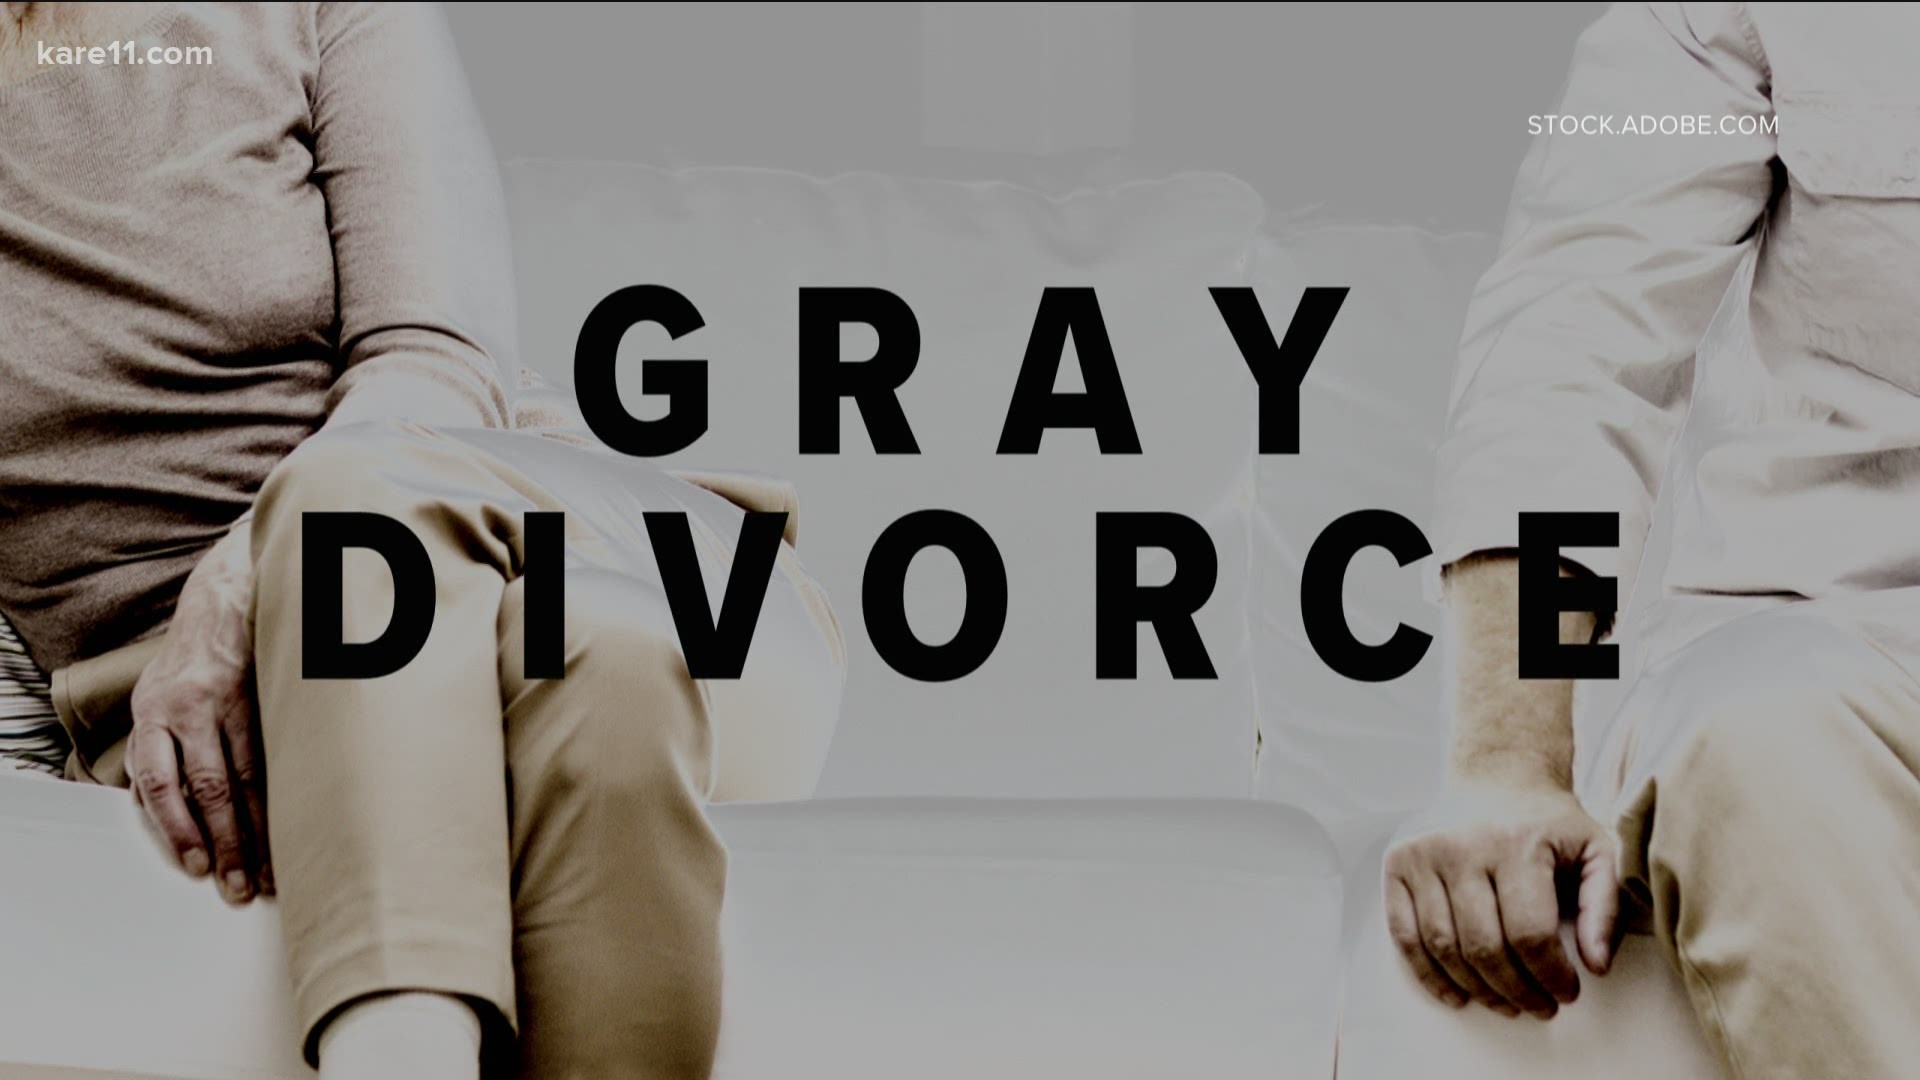 The AARP calls them "Gray Divorces" and research shows they've gone up by more than 50% over the last 25 years